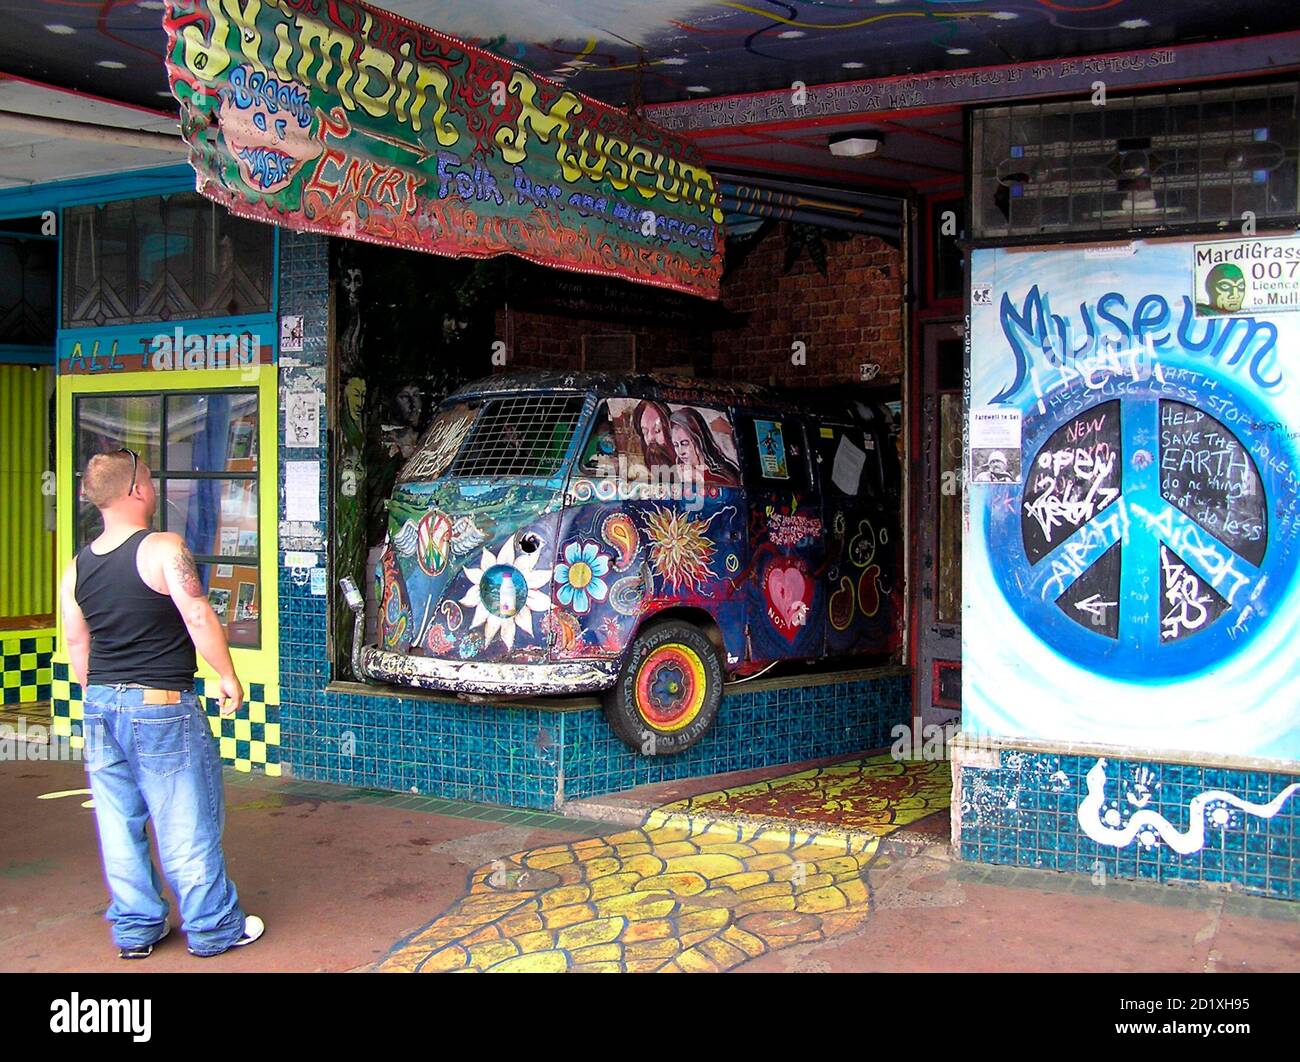 A tourist inspects the Nimbin Museum on the main street of Australia's hippy capital Nimbin on April 12, 2007. The museum promotes the hippy way of life which involves the freedom to smoke marijuana. The village of Nimbin on Australia's fertile northeast coast was born at the 1973 Aquarius hippy festival and has battled authorities for 34 years to survive. But now hippies fear rampant coastal development will destroy their laid-back way of life. Picture taken April 12, 2007.  To match feature AUSTRALIA-HIPPIES  REUTERS/Michael Perry   (AUSTRALIA) Stock Photo